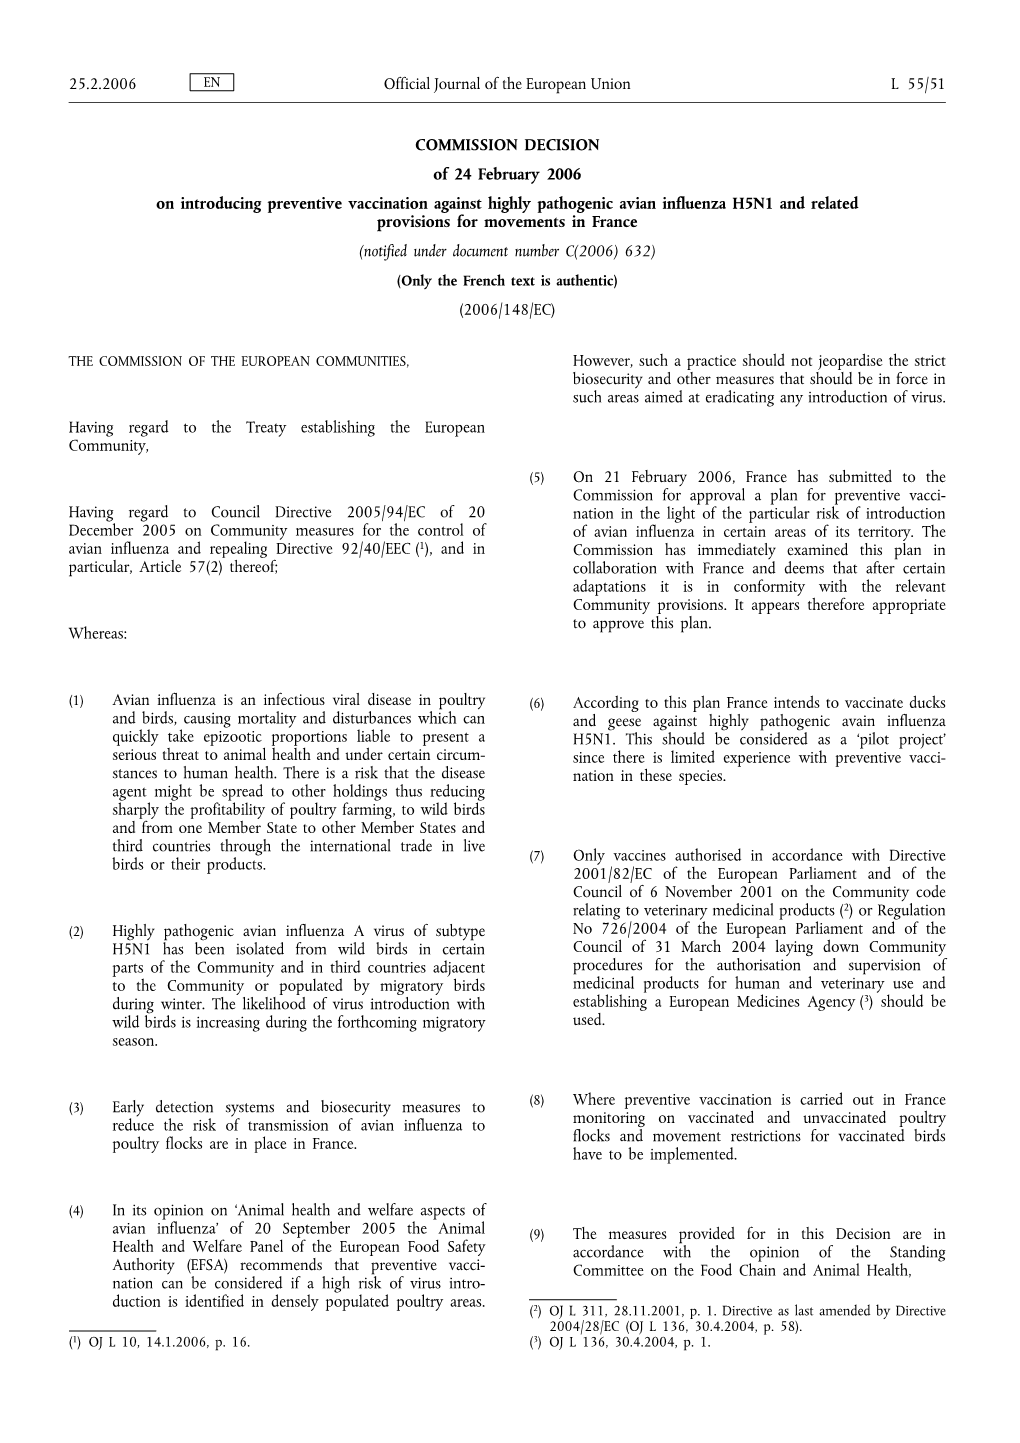 COMMISSION DECISION of 24 February 2006 on Introducing